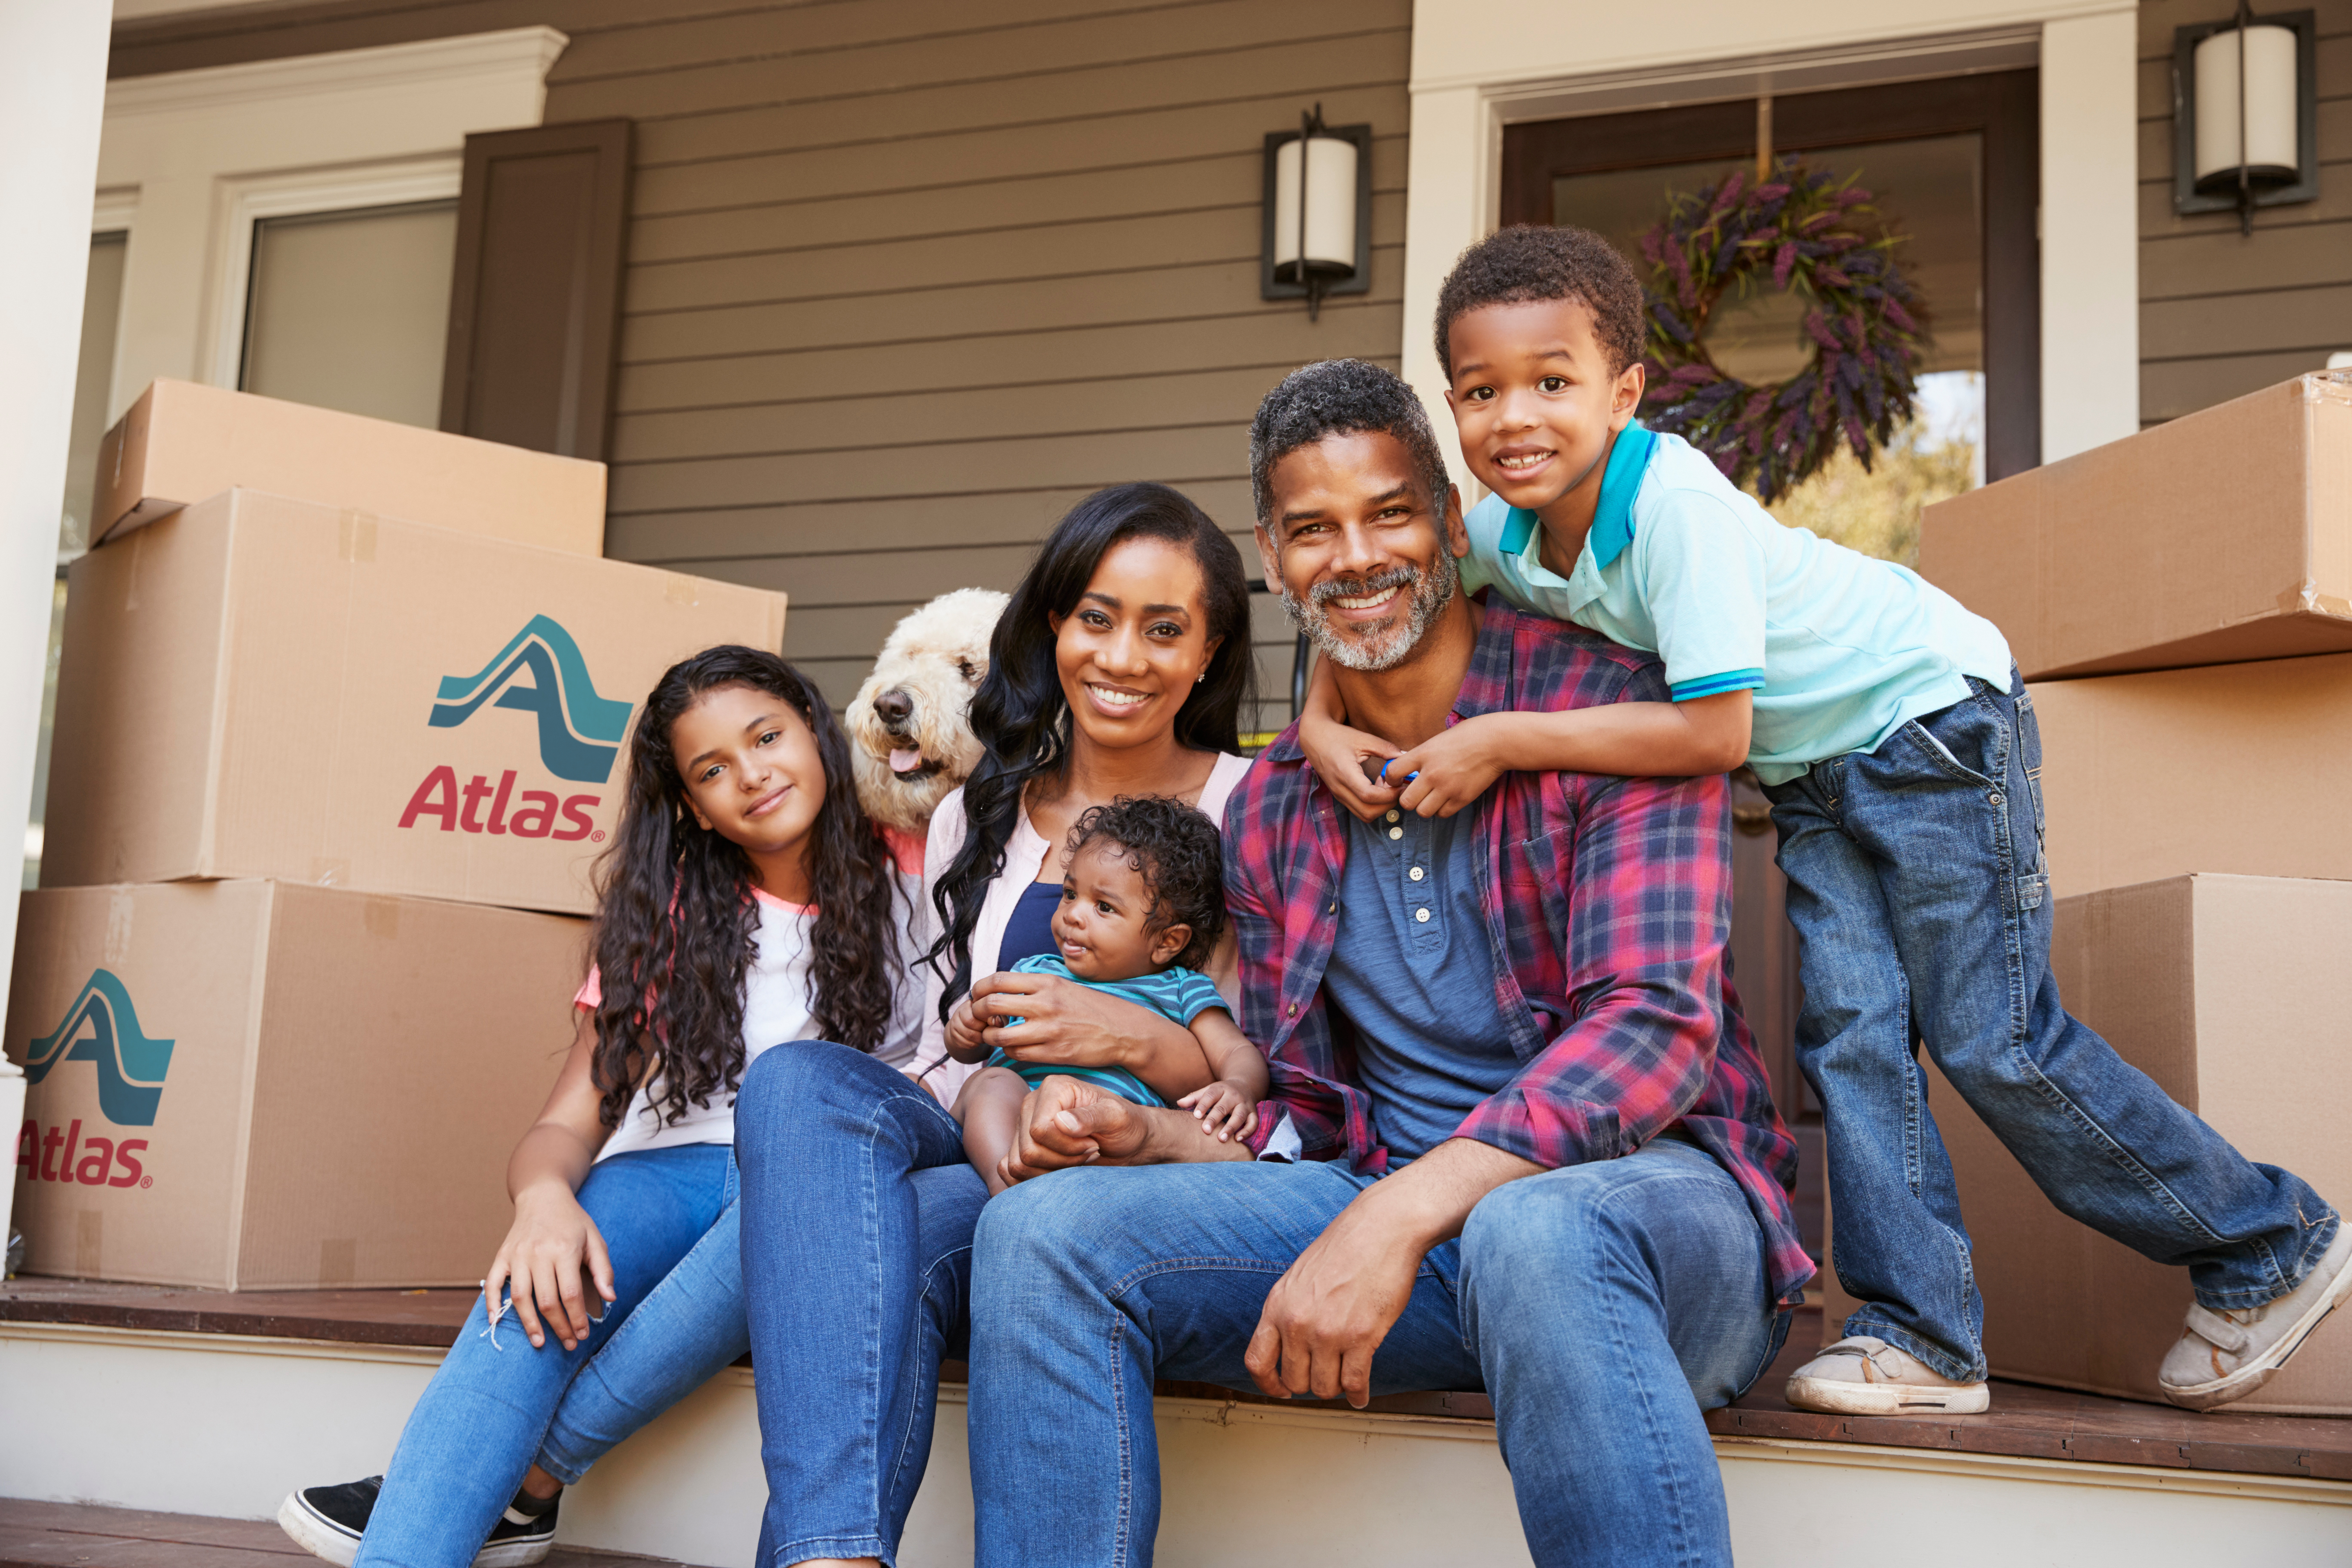 Atlas-Family-on-porch-with-boxes.jpg